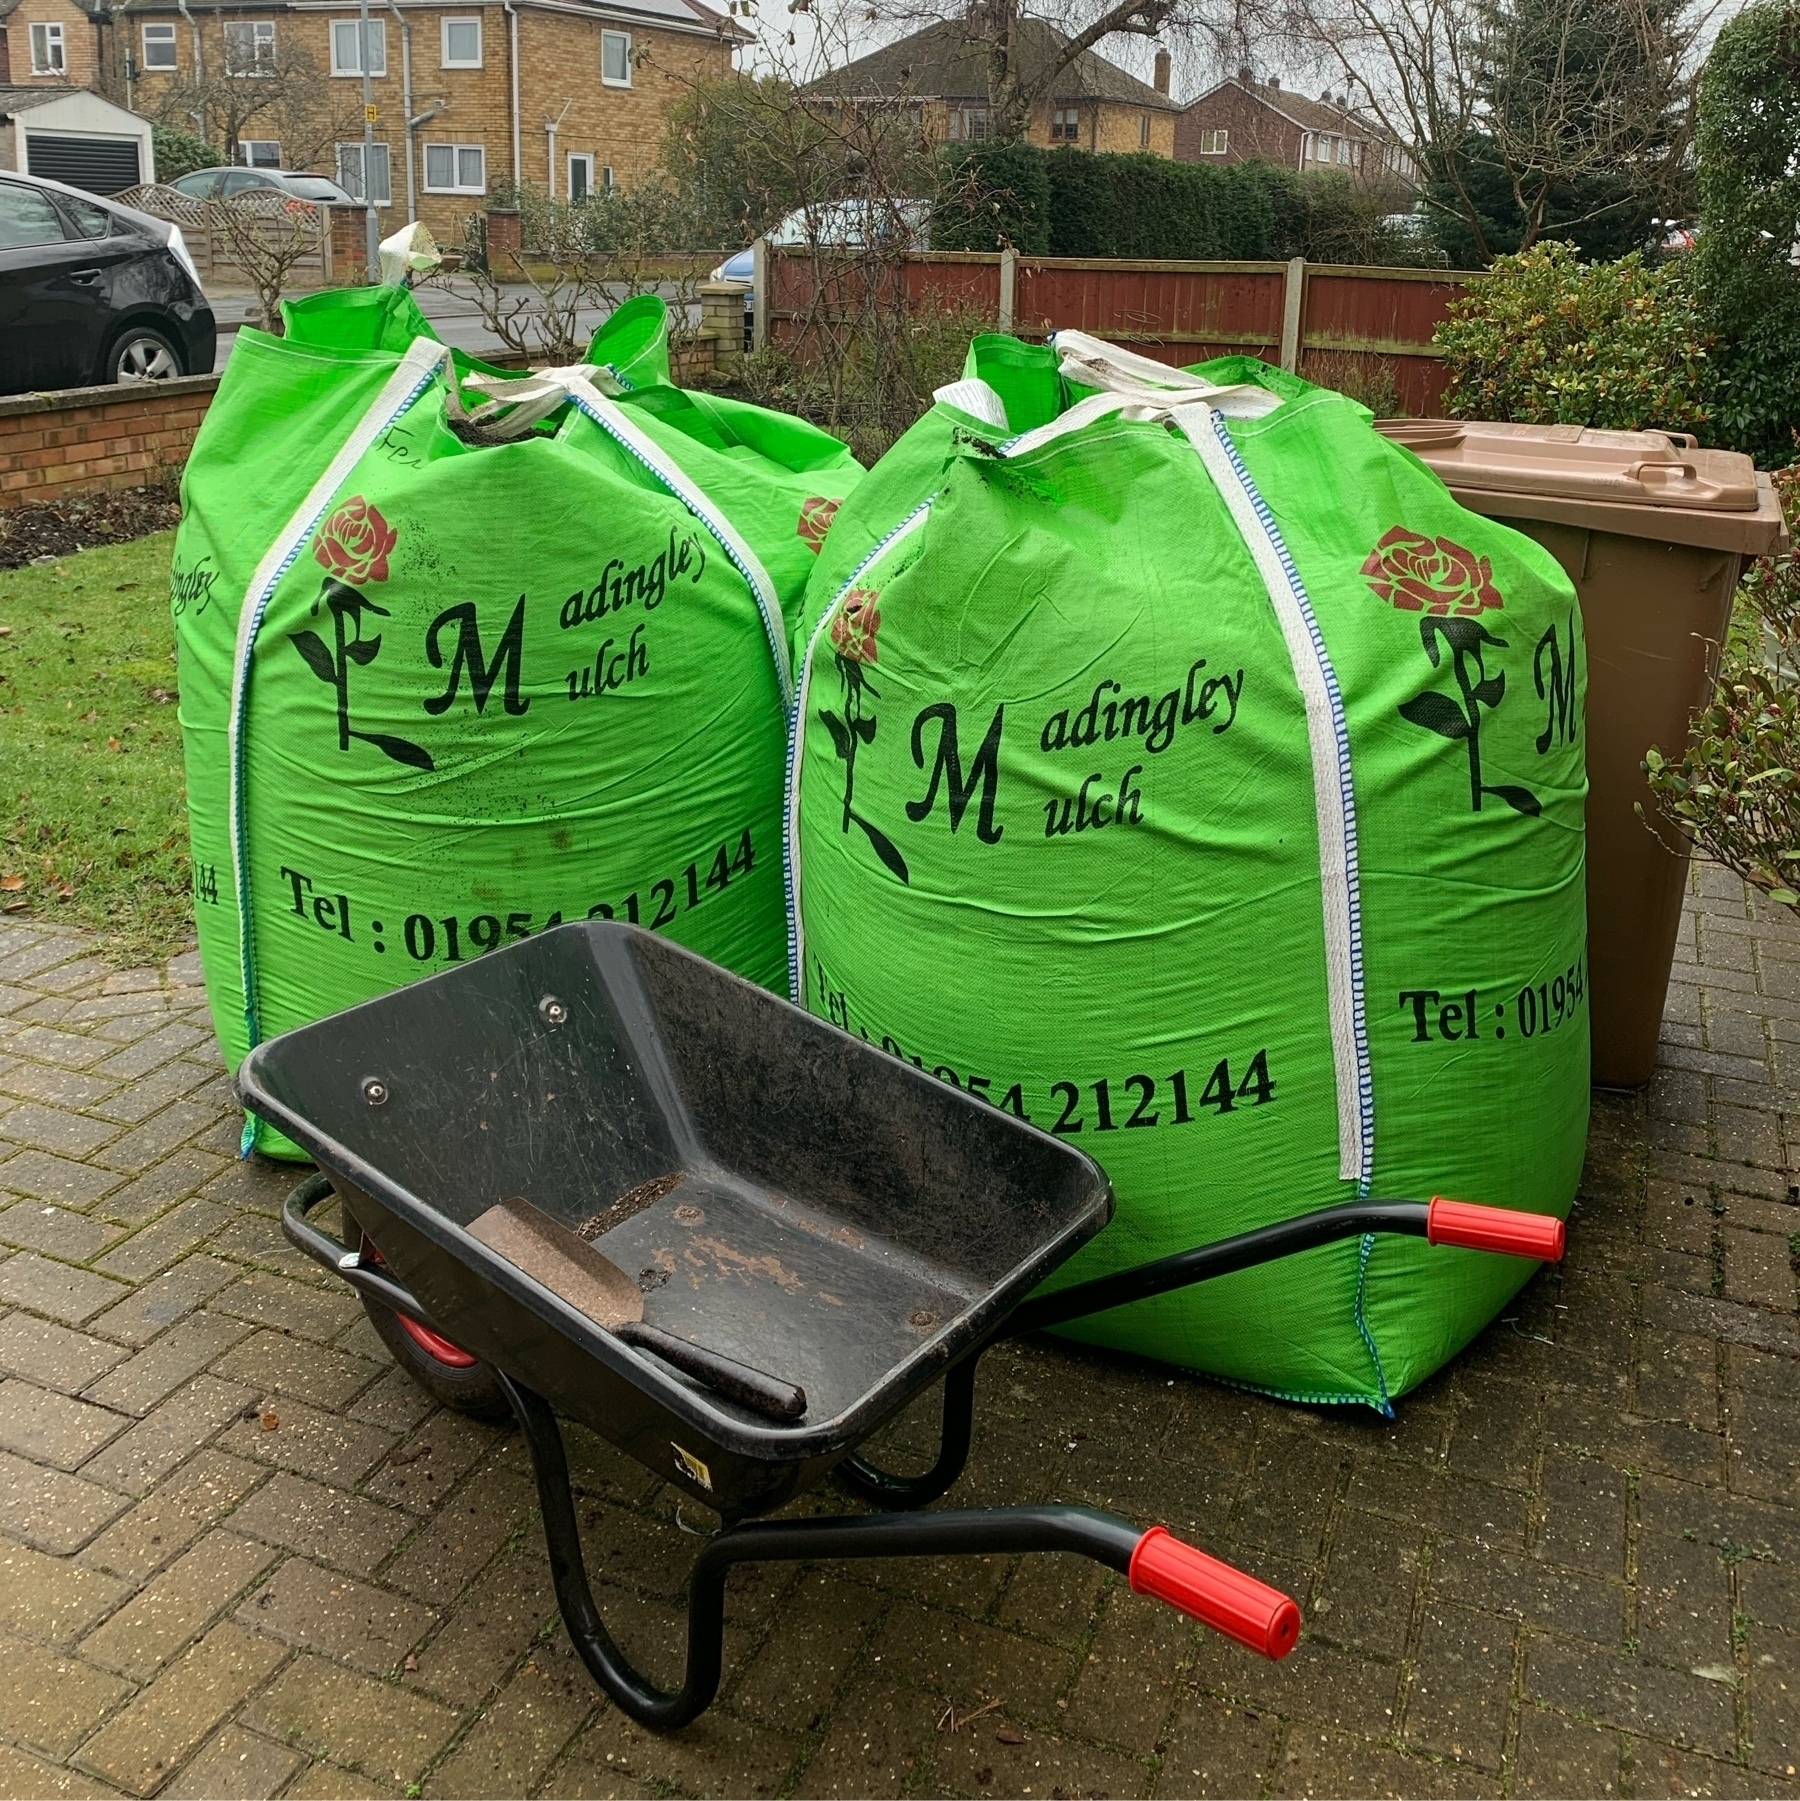 Two huge green bags full of soil. A wheelbarrow in the foreground